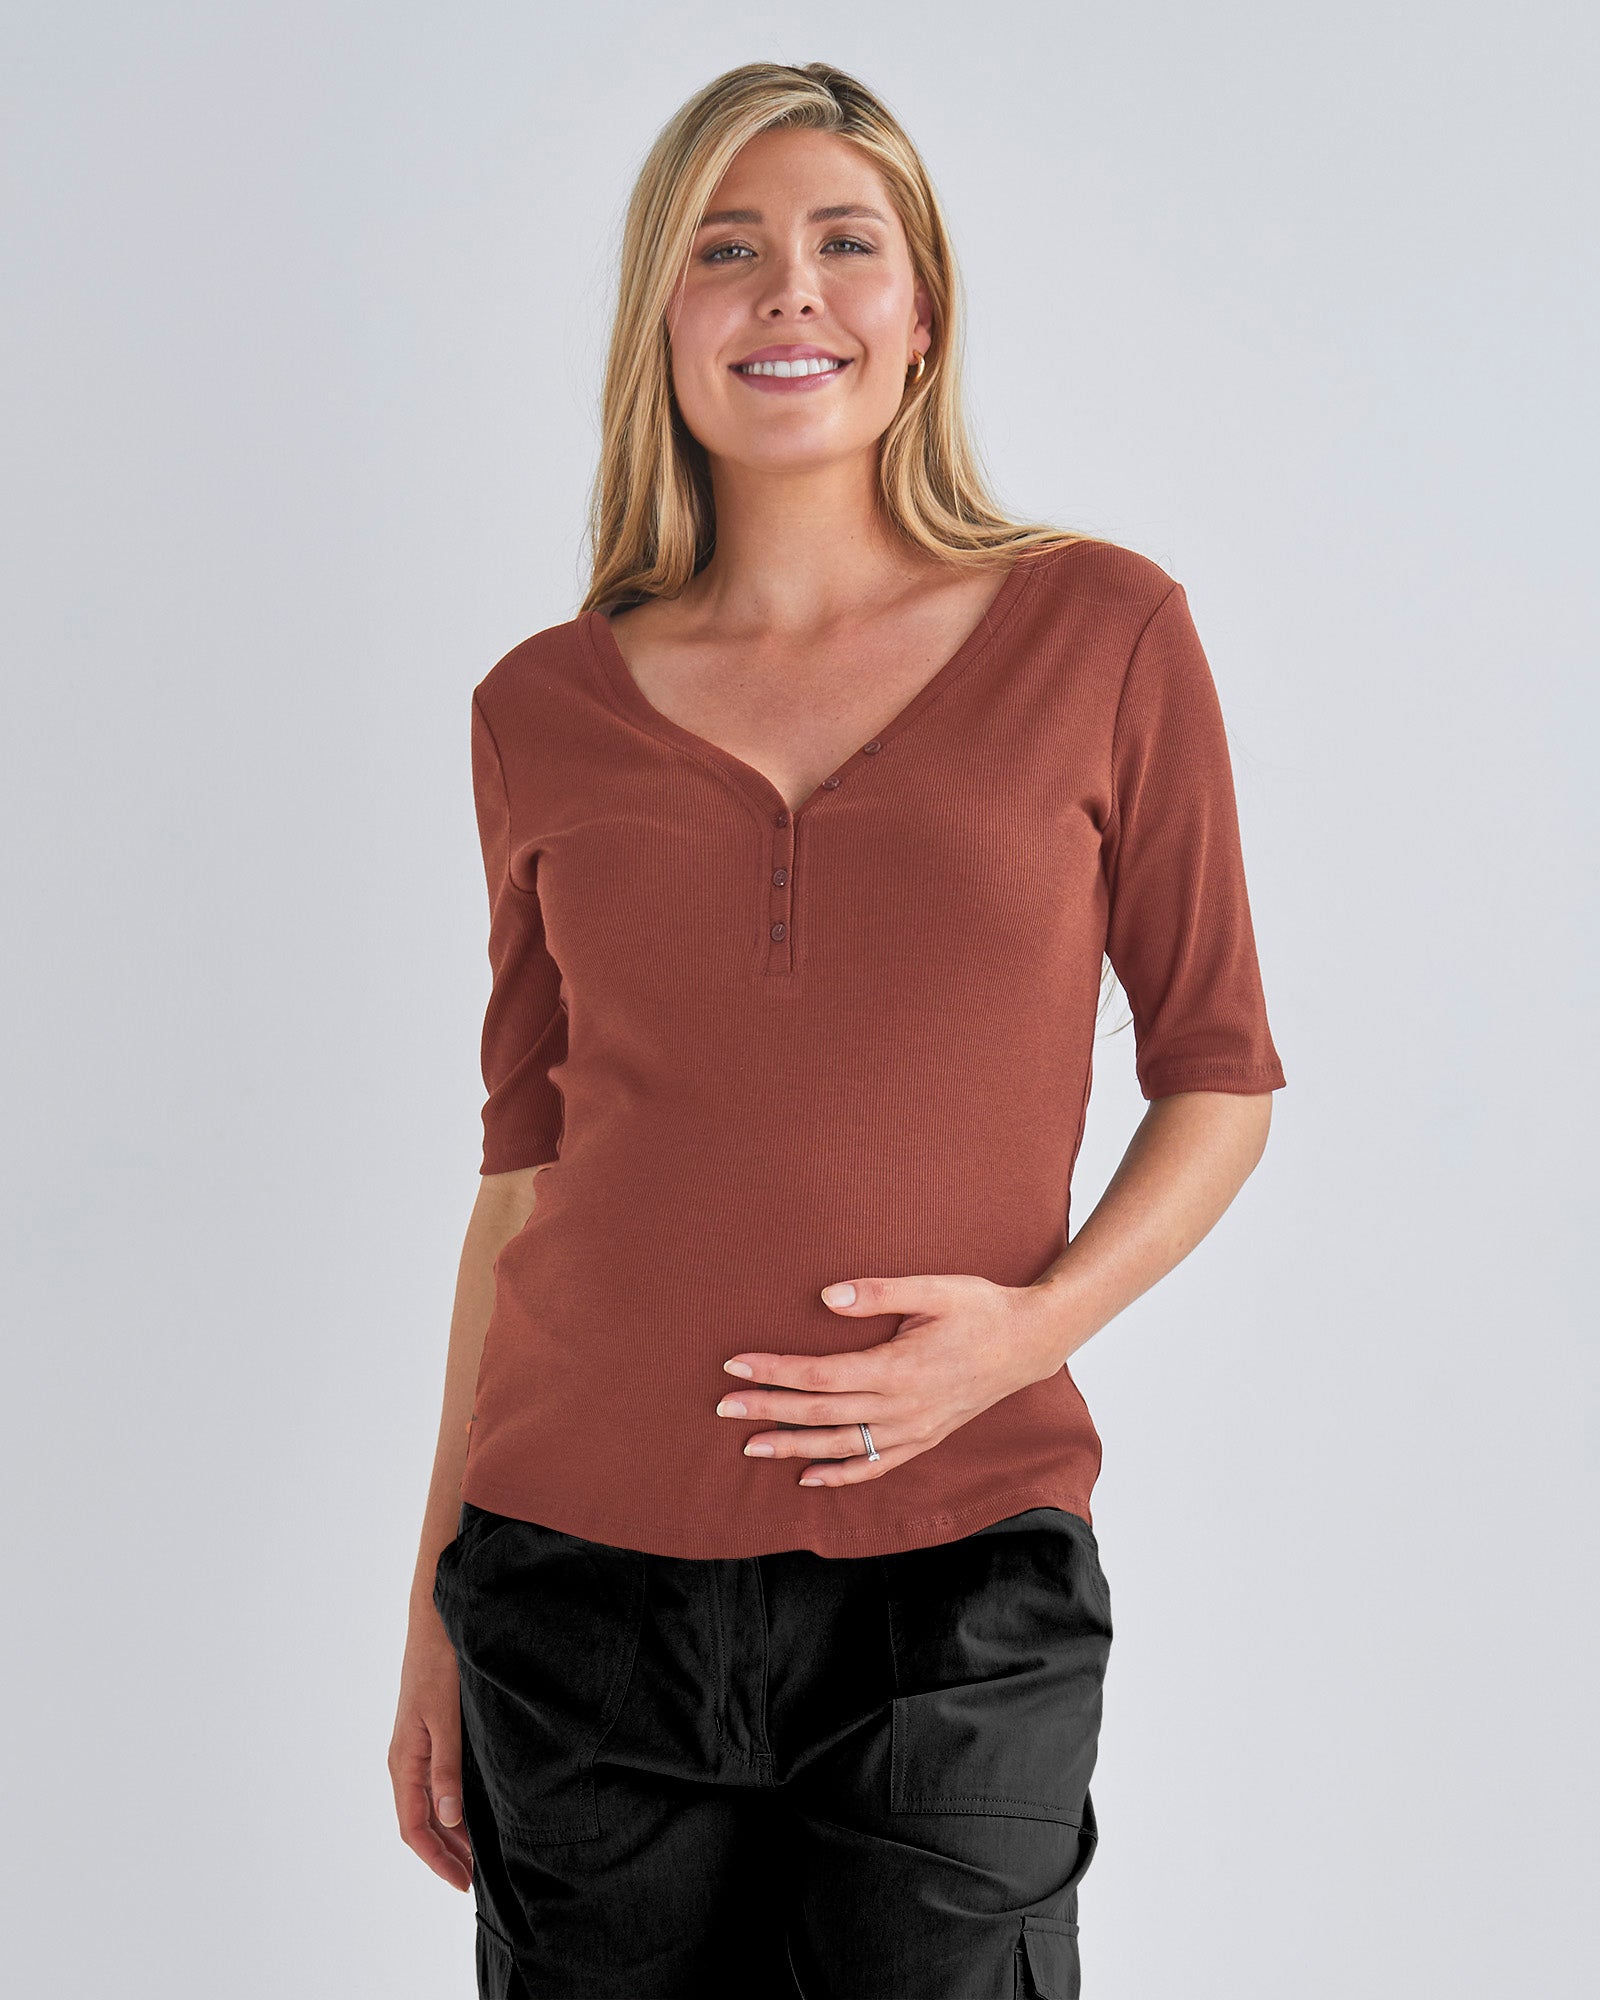 Main view-Comfortable Stylish Flattering Fit Soft Fabric Casual Wear from AngelMaternity